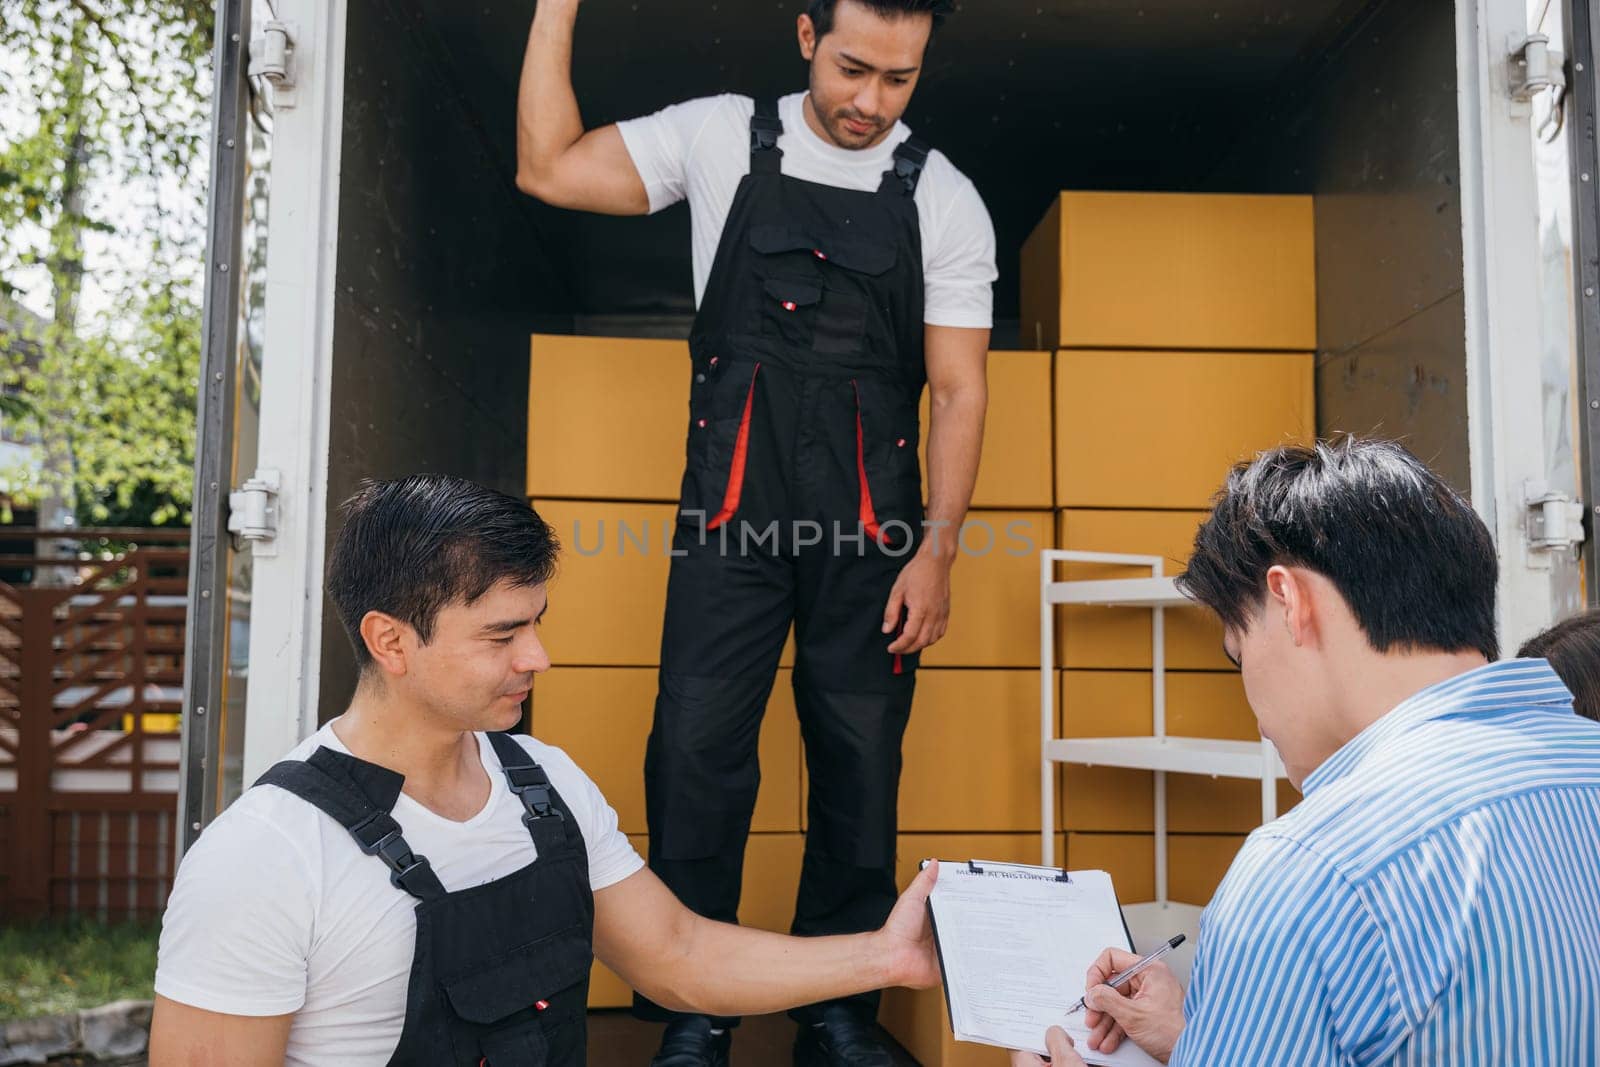 Satisfied couple signs delivery checklist after professional movers aid in furniture lifting. Uniformed employees emphasize teamwork for customer contentment. Moving Day Concept by Sorapop